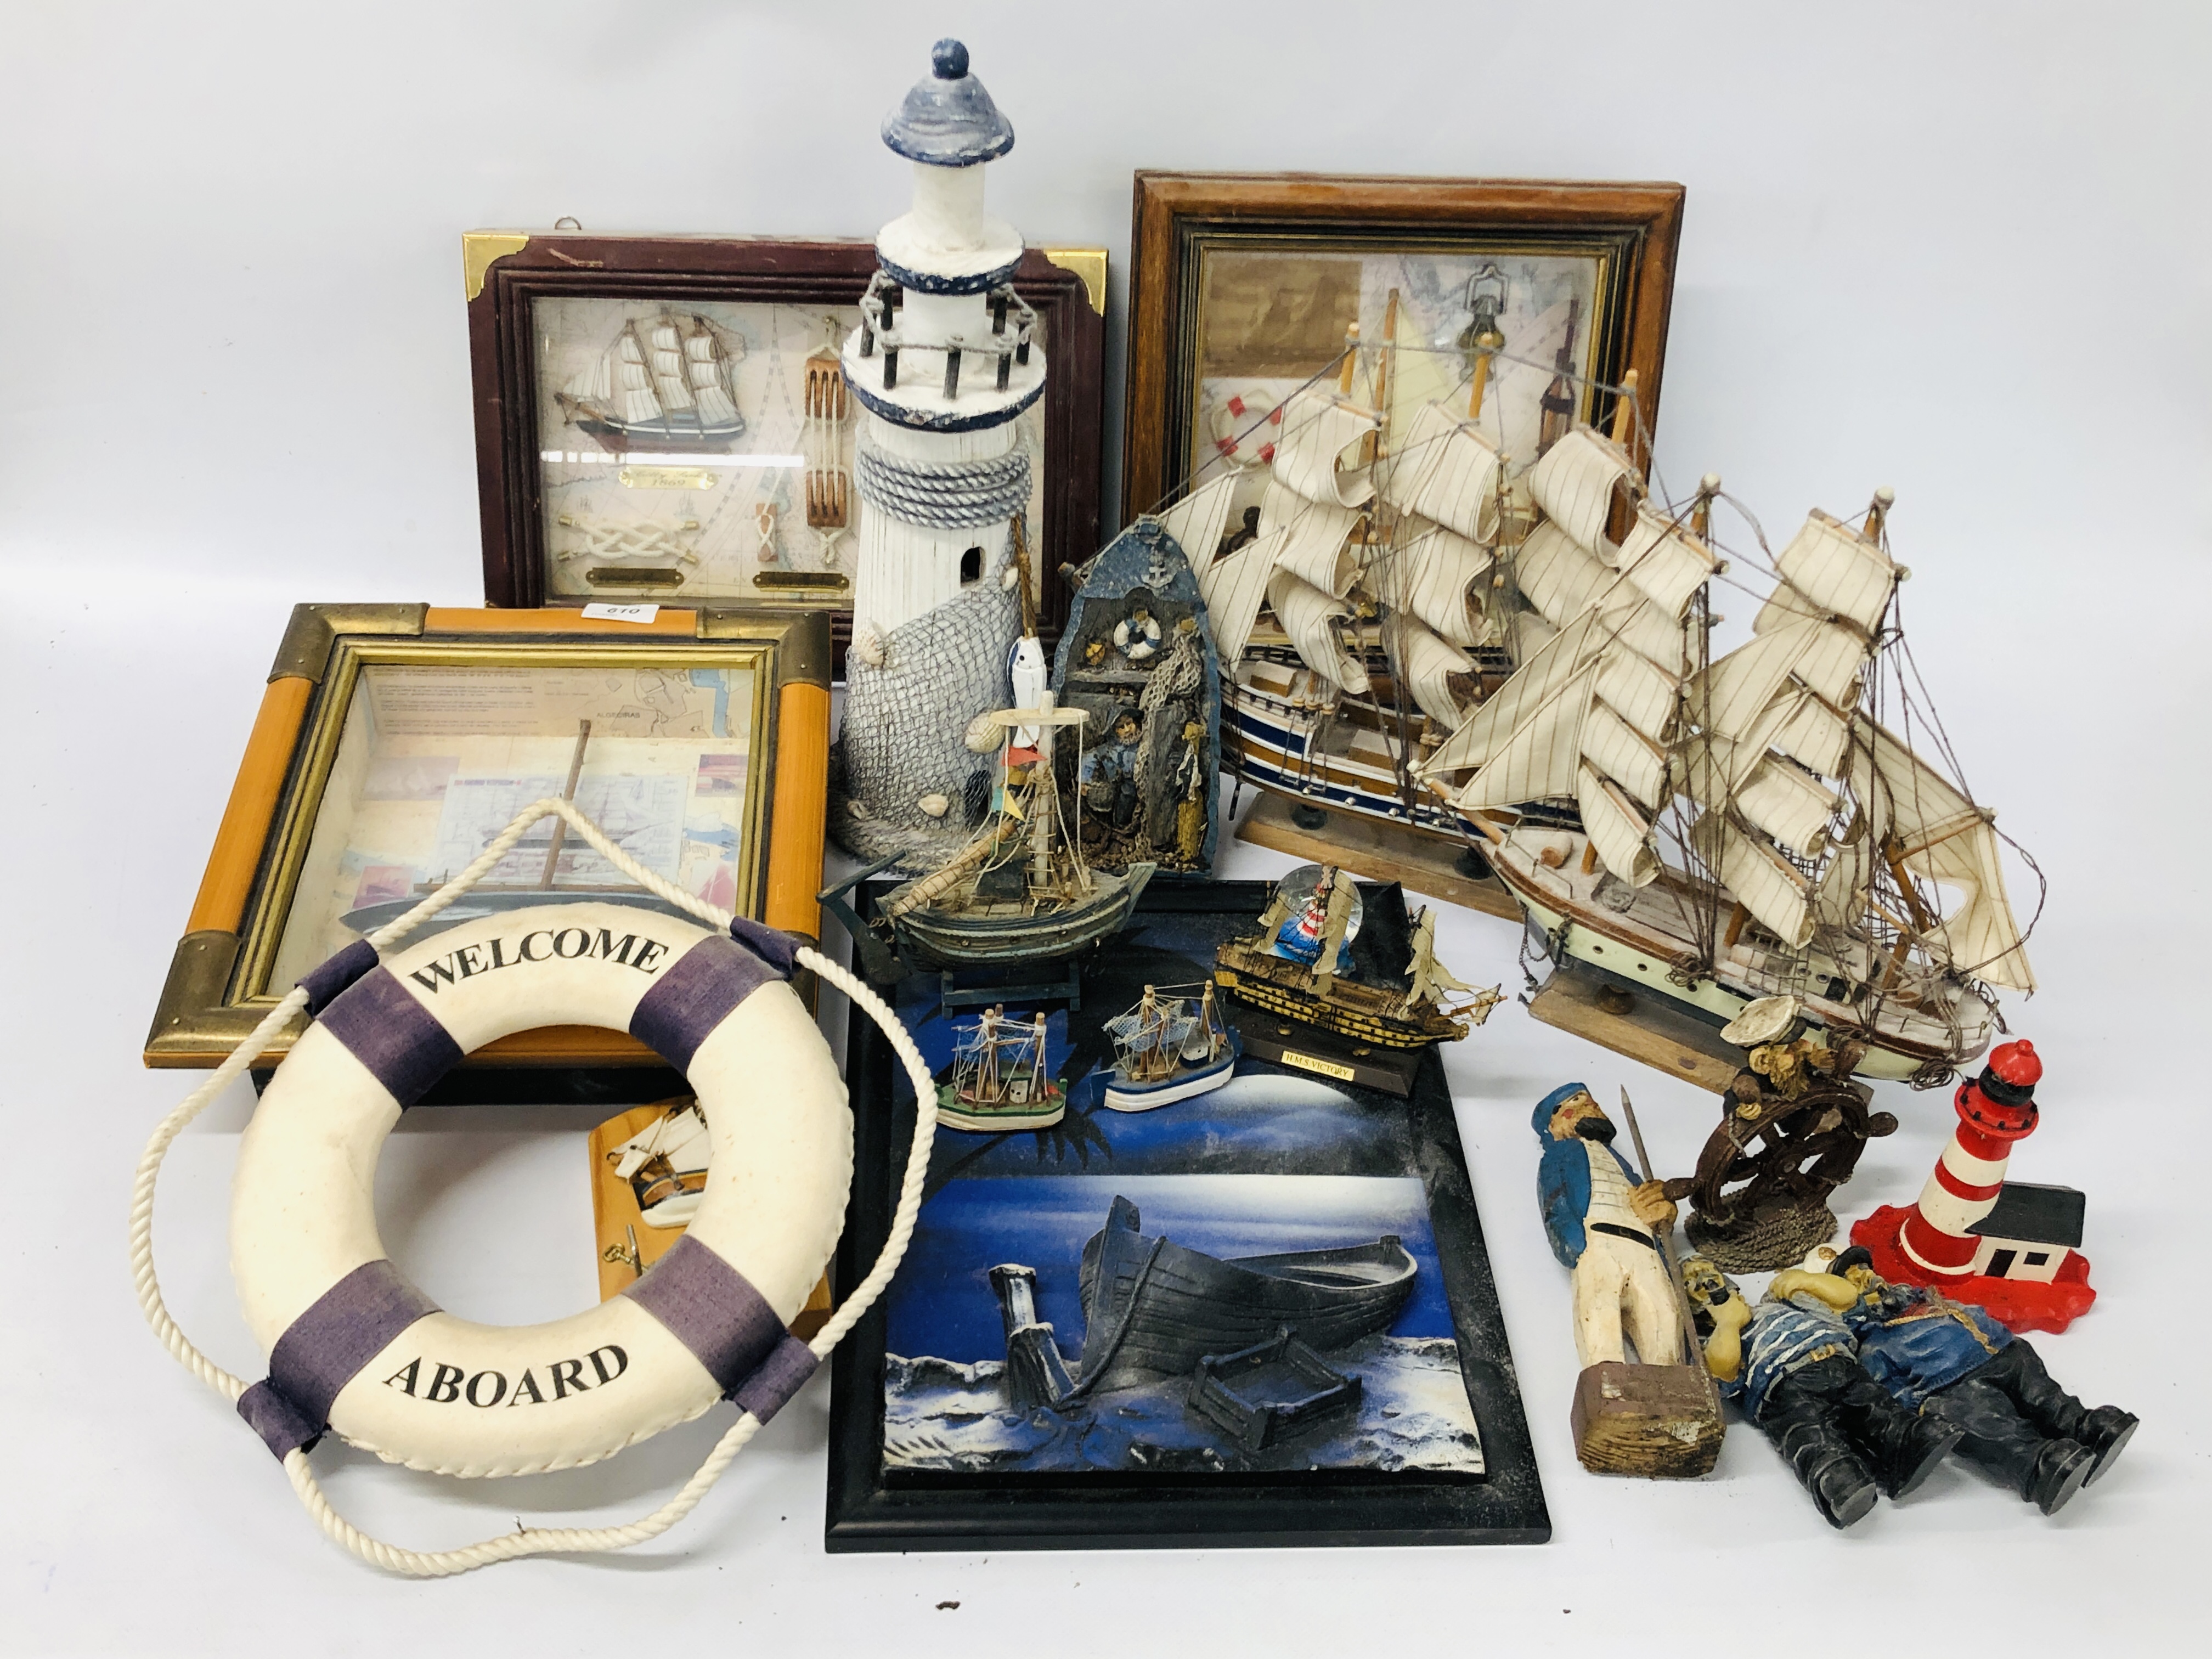 3 NAUTICAL 3D CASED DISPLAYS AND OTHER NAUTICAL ITEMS TO INCLUDE SAILING SHIPS, LIGHTHOUSES ETC.